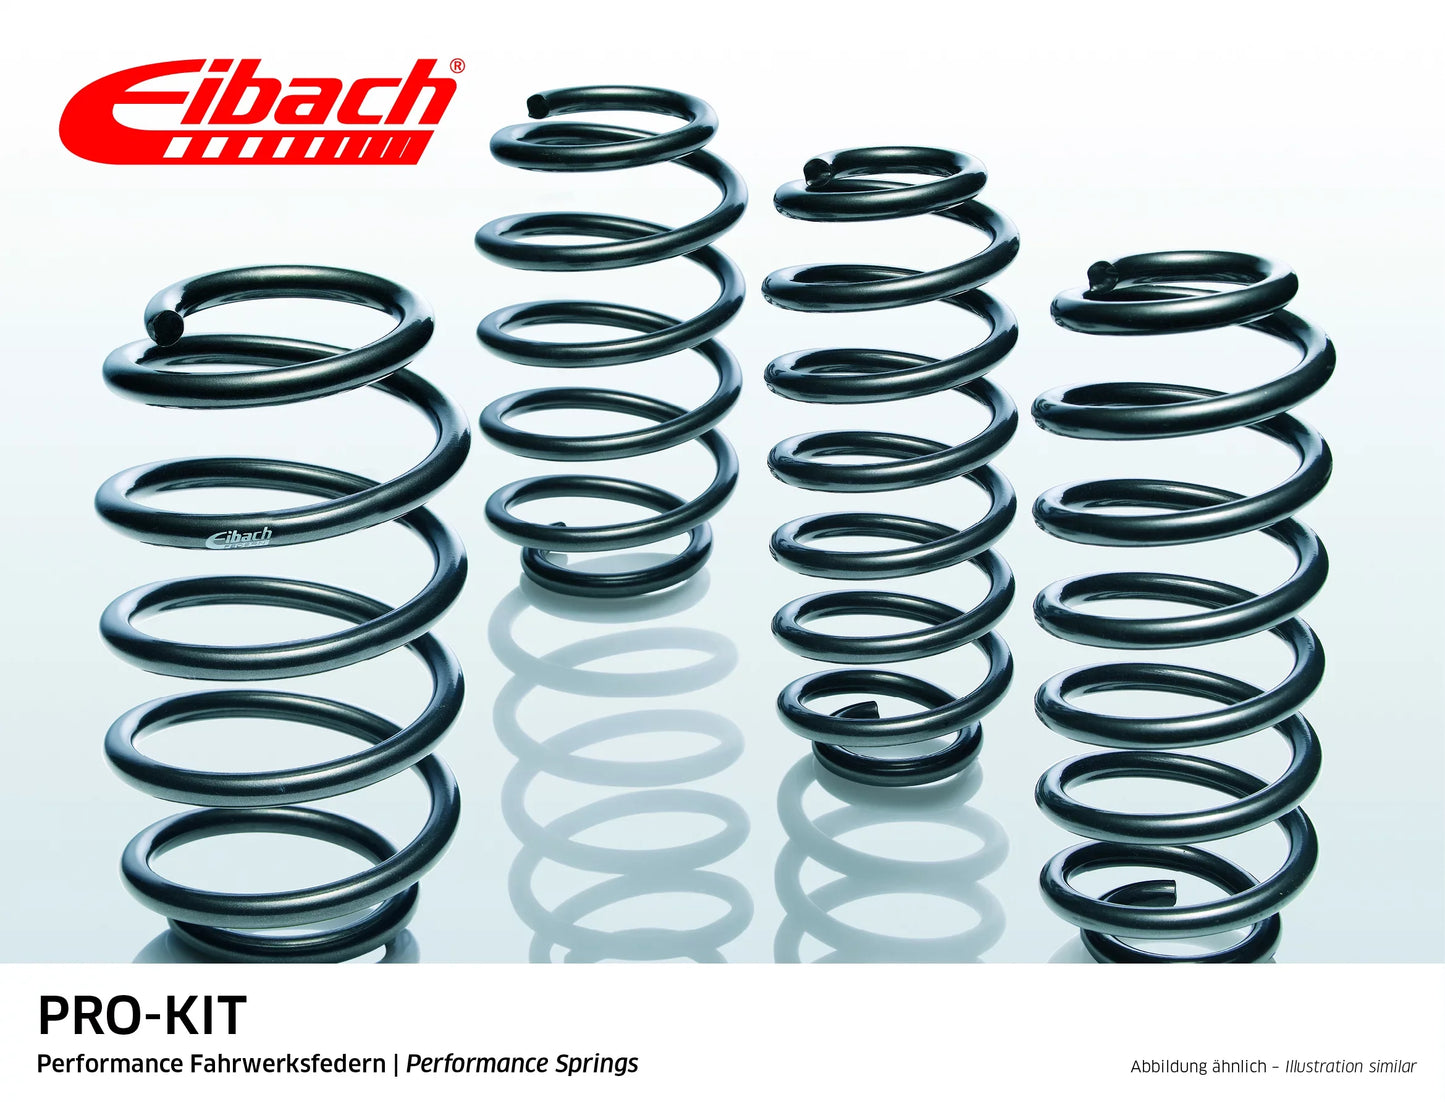 Eibach Pro-Kit Lowering Springs (E10-20-001-08-22) at £257.82